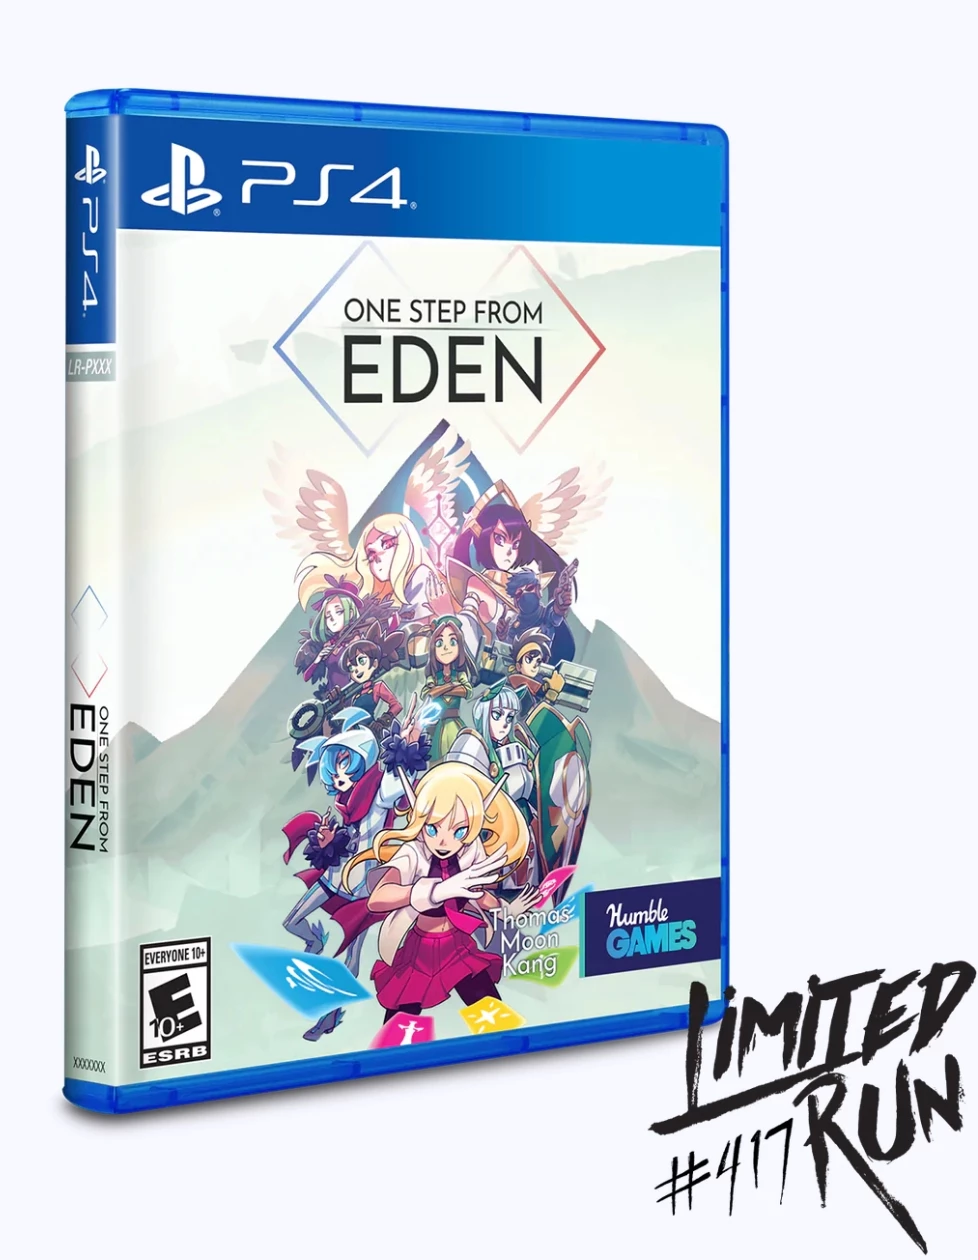 One Step From Eden (Limited Run) (PS4), Humble Games